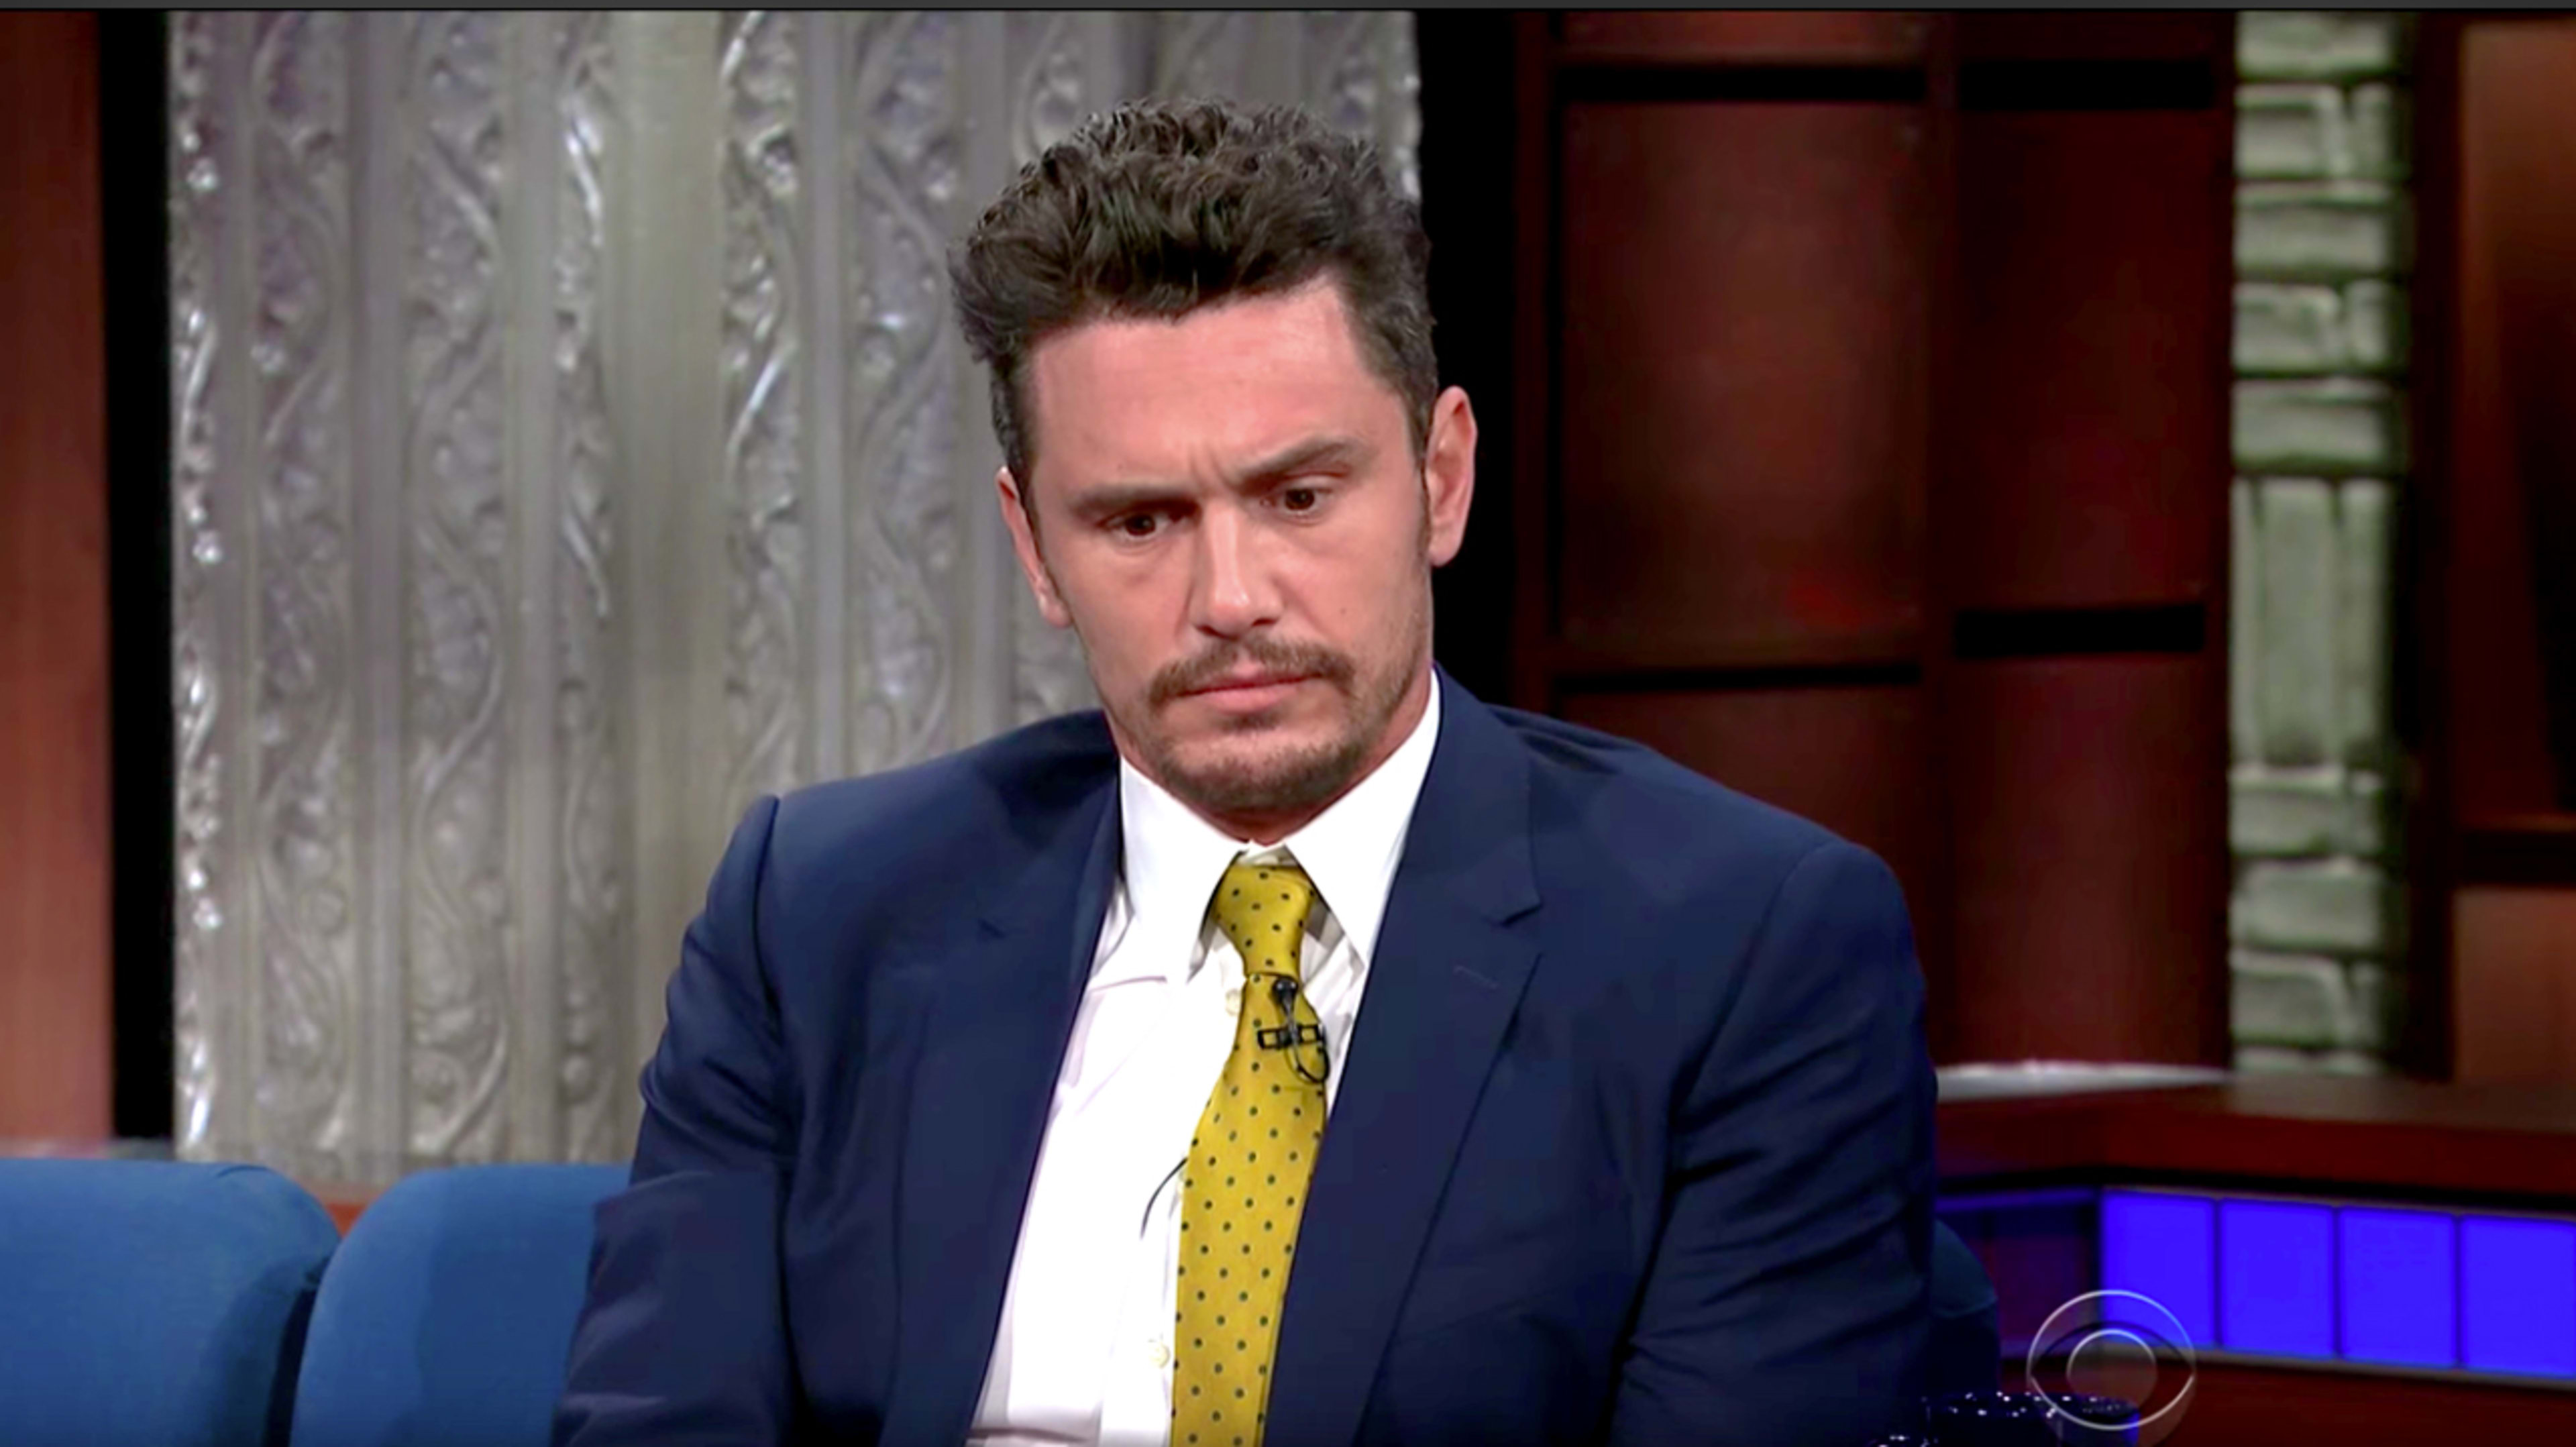 James Franco’s Carefully Worded Denial Of Sexual Misconduct Claims Raises Lots Of Questions